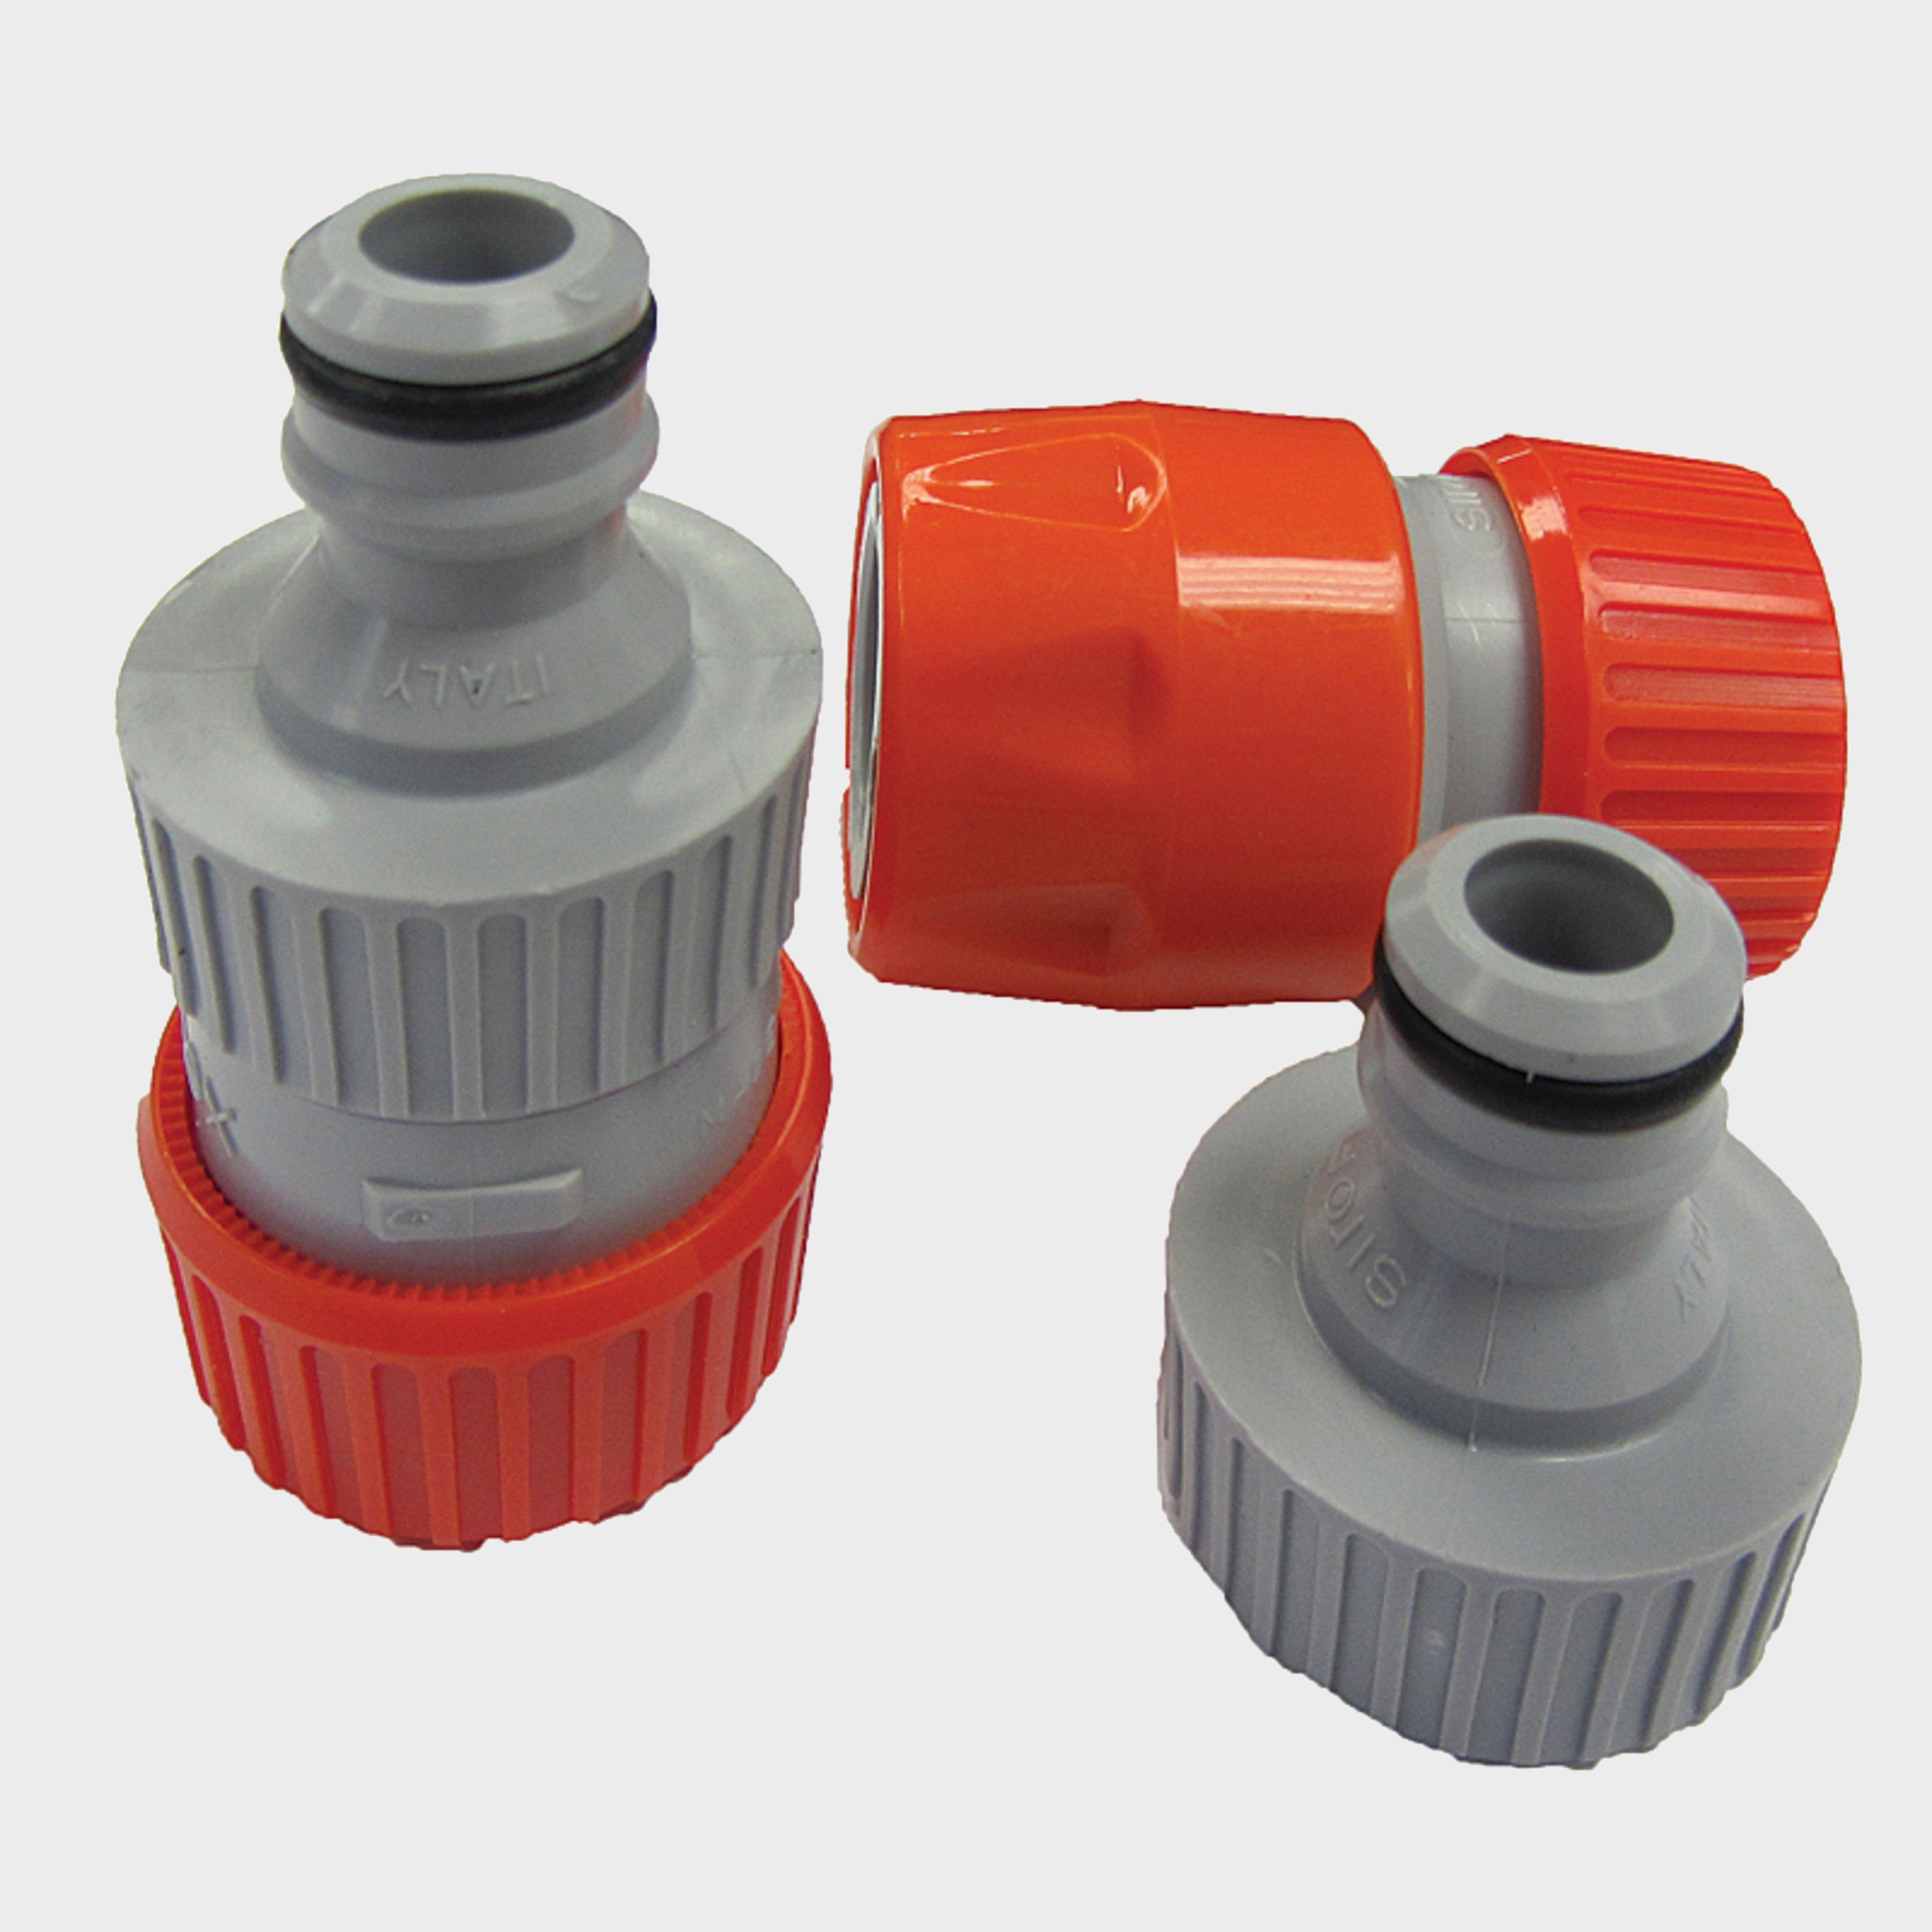 Hitchman Aquaroll Mains Adaptor Extension Hose Connectors - Red/replace  Red/replace